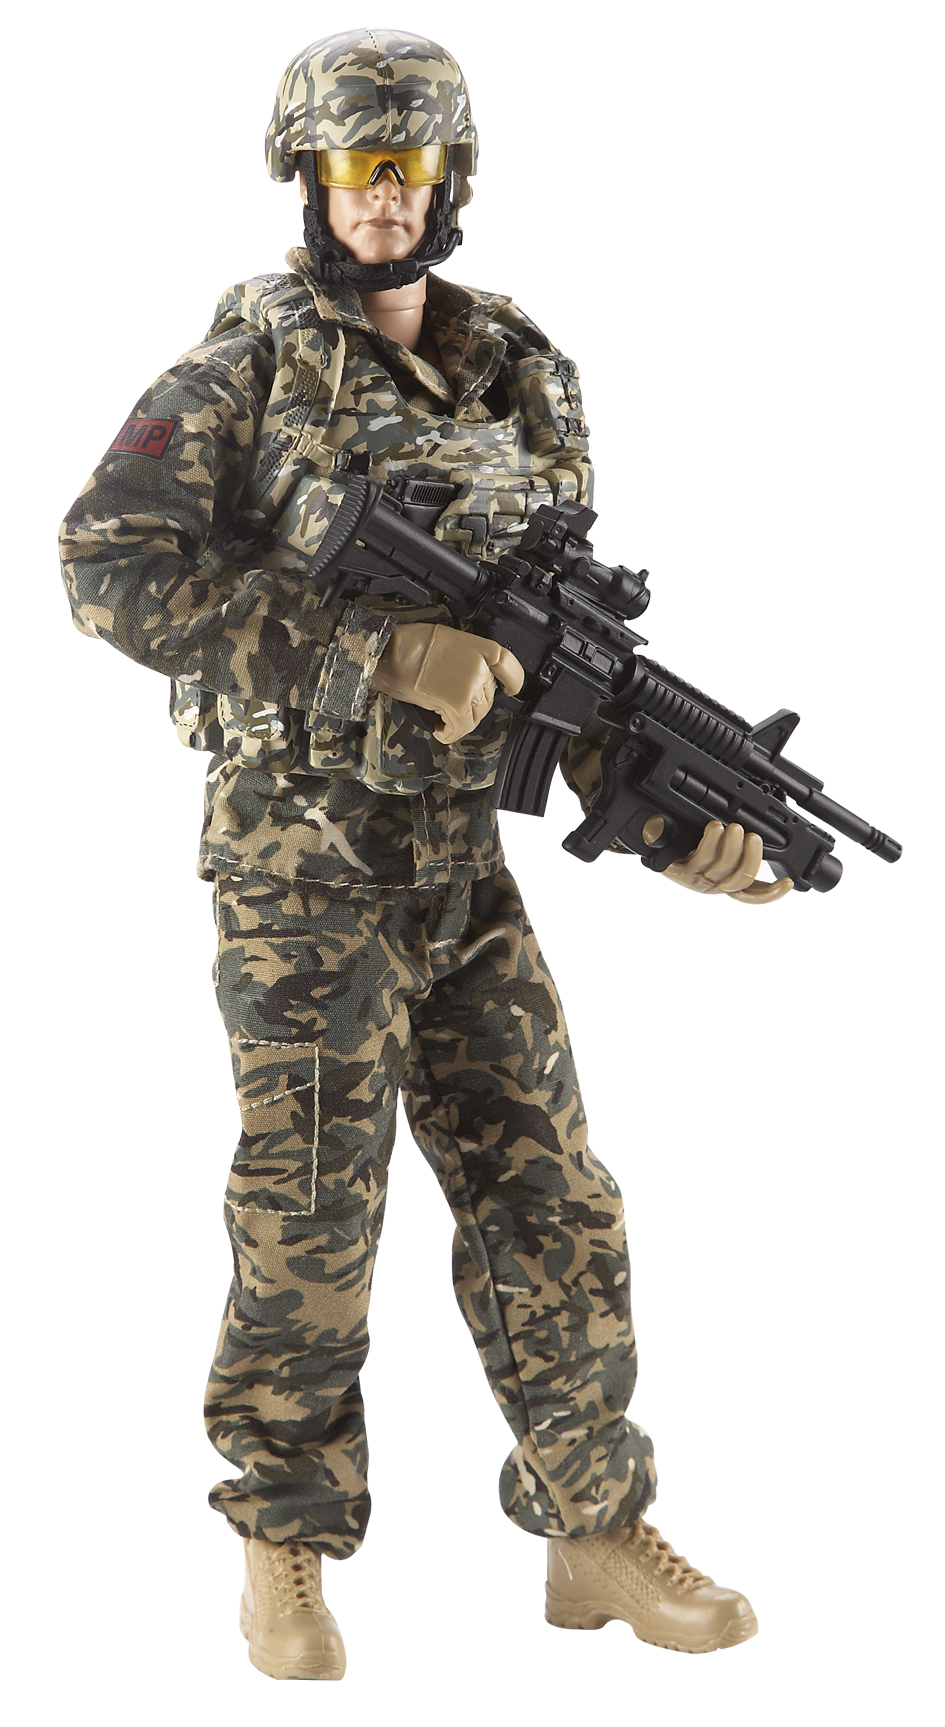 H.M. Armed Forces Outfits - Cpo